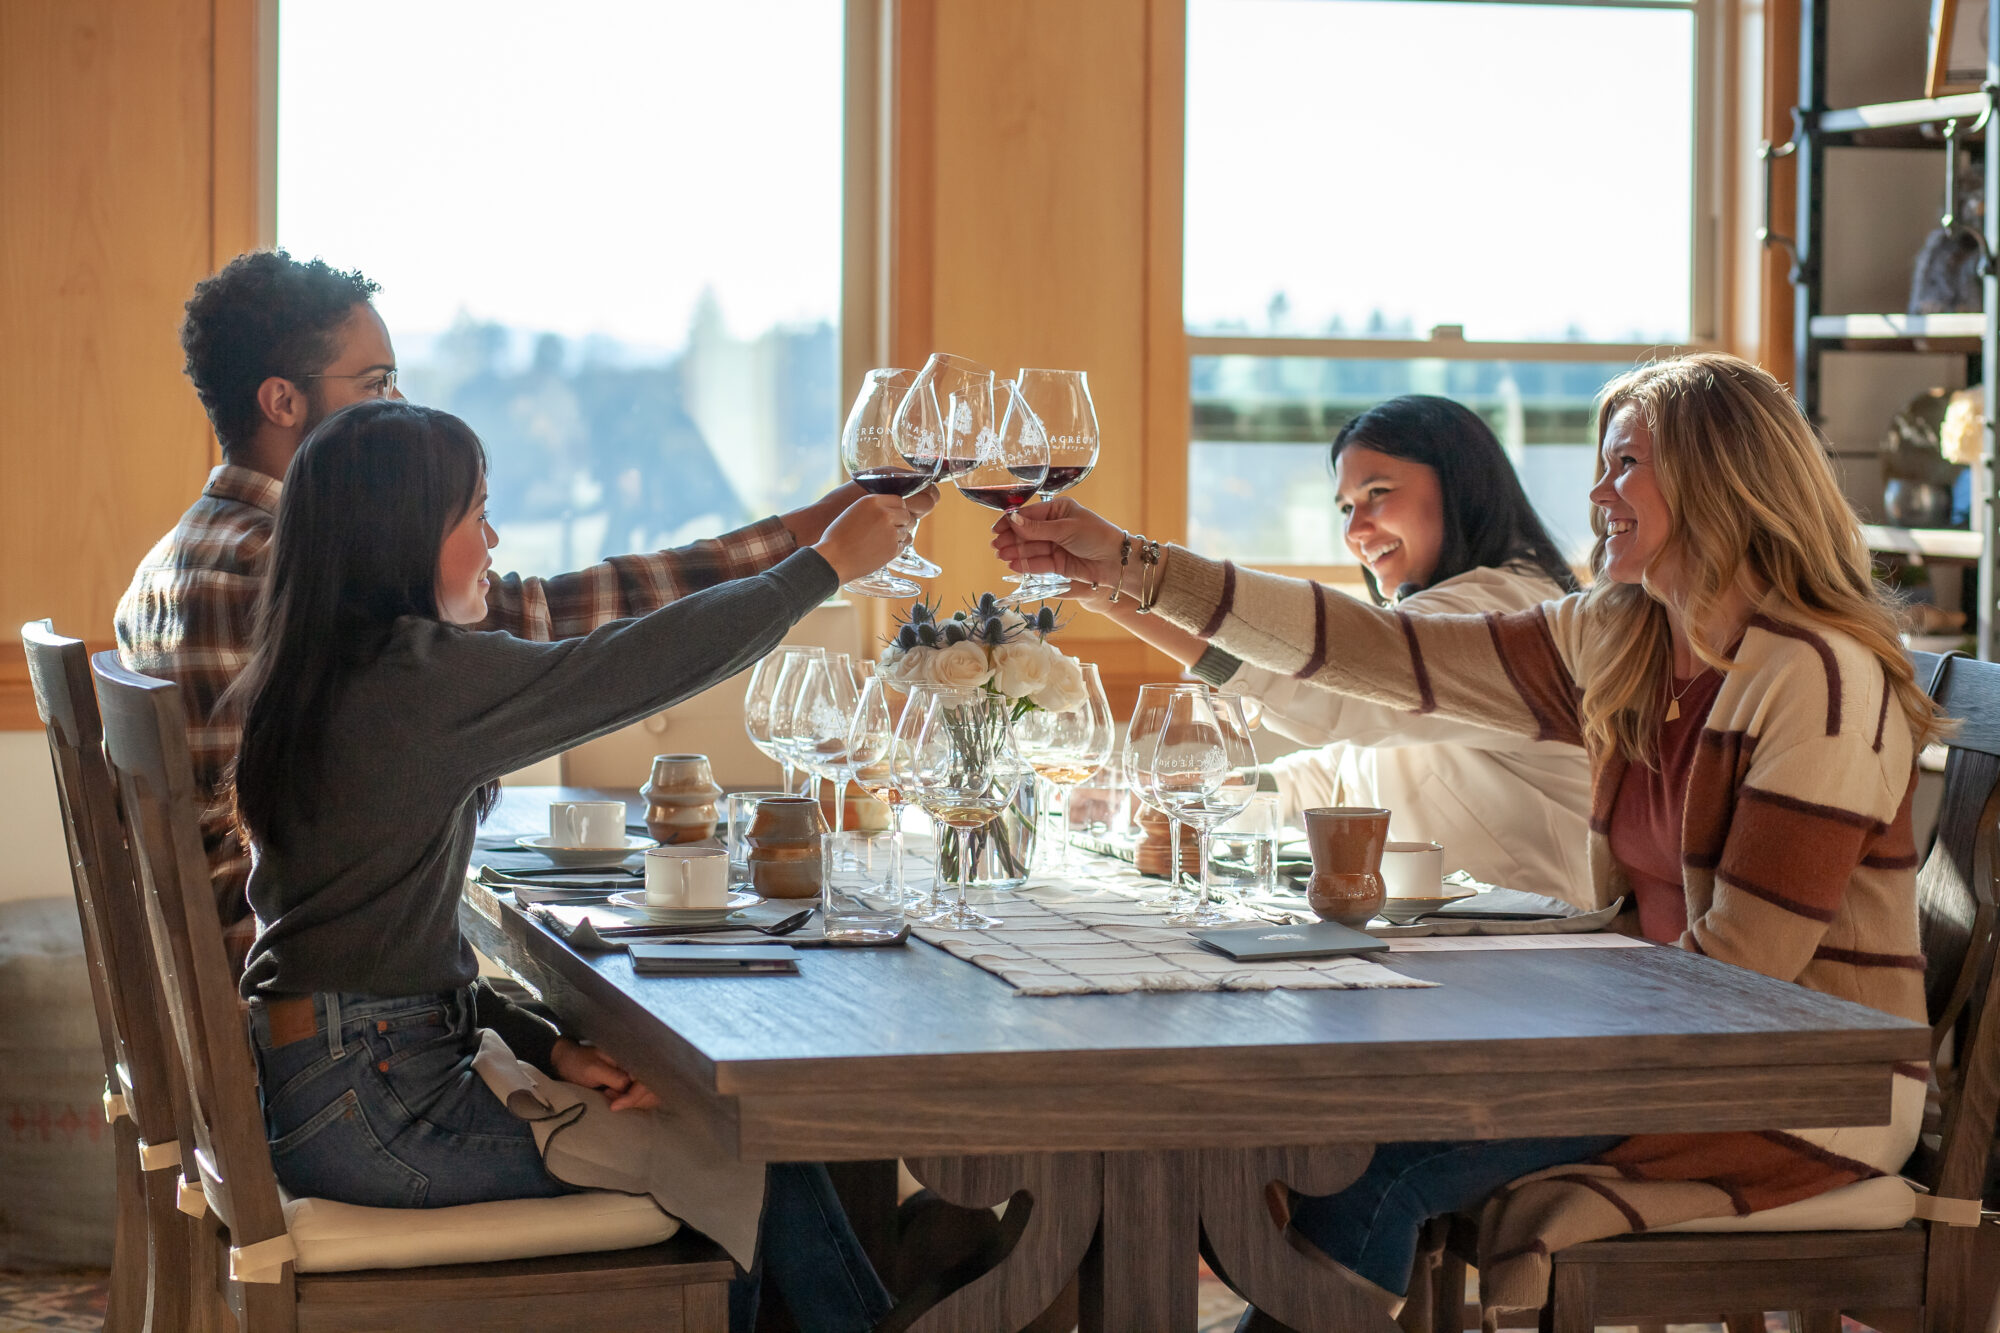 A group raising their glasses to a chef prepared meal.